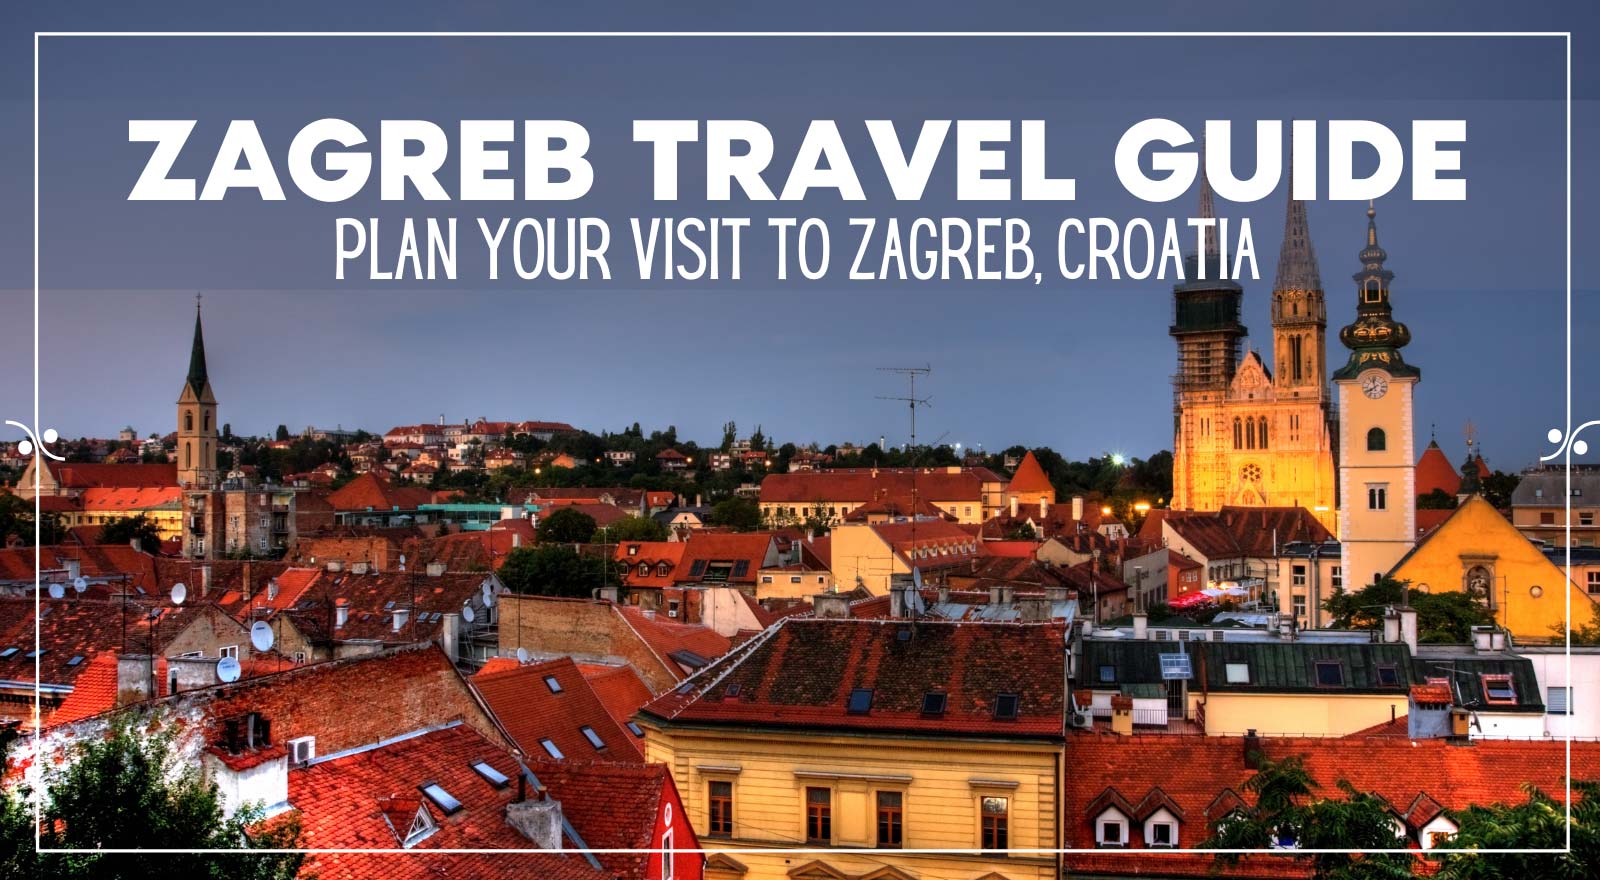 tour guide for zagreb